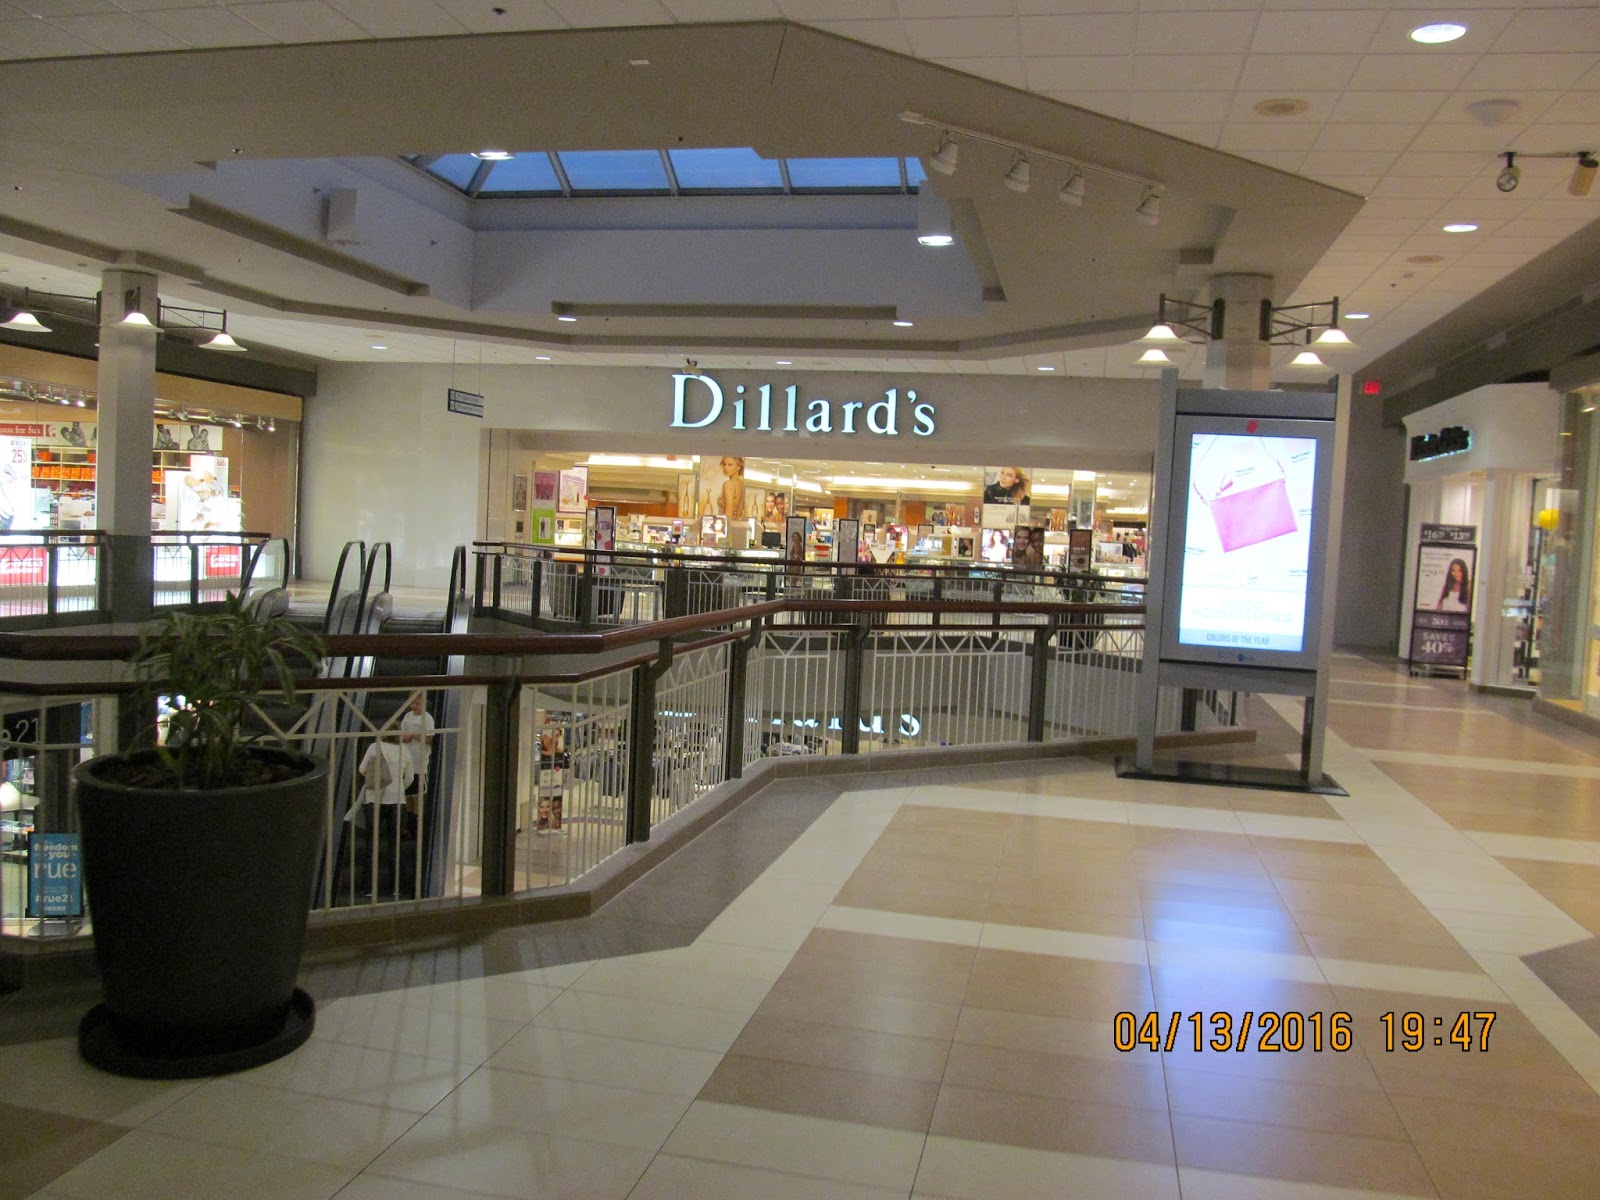 Trip to the Mall: Mid Rivers Mall- St. Peters, Missouri from 4.bp.blogspot....